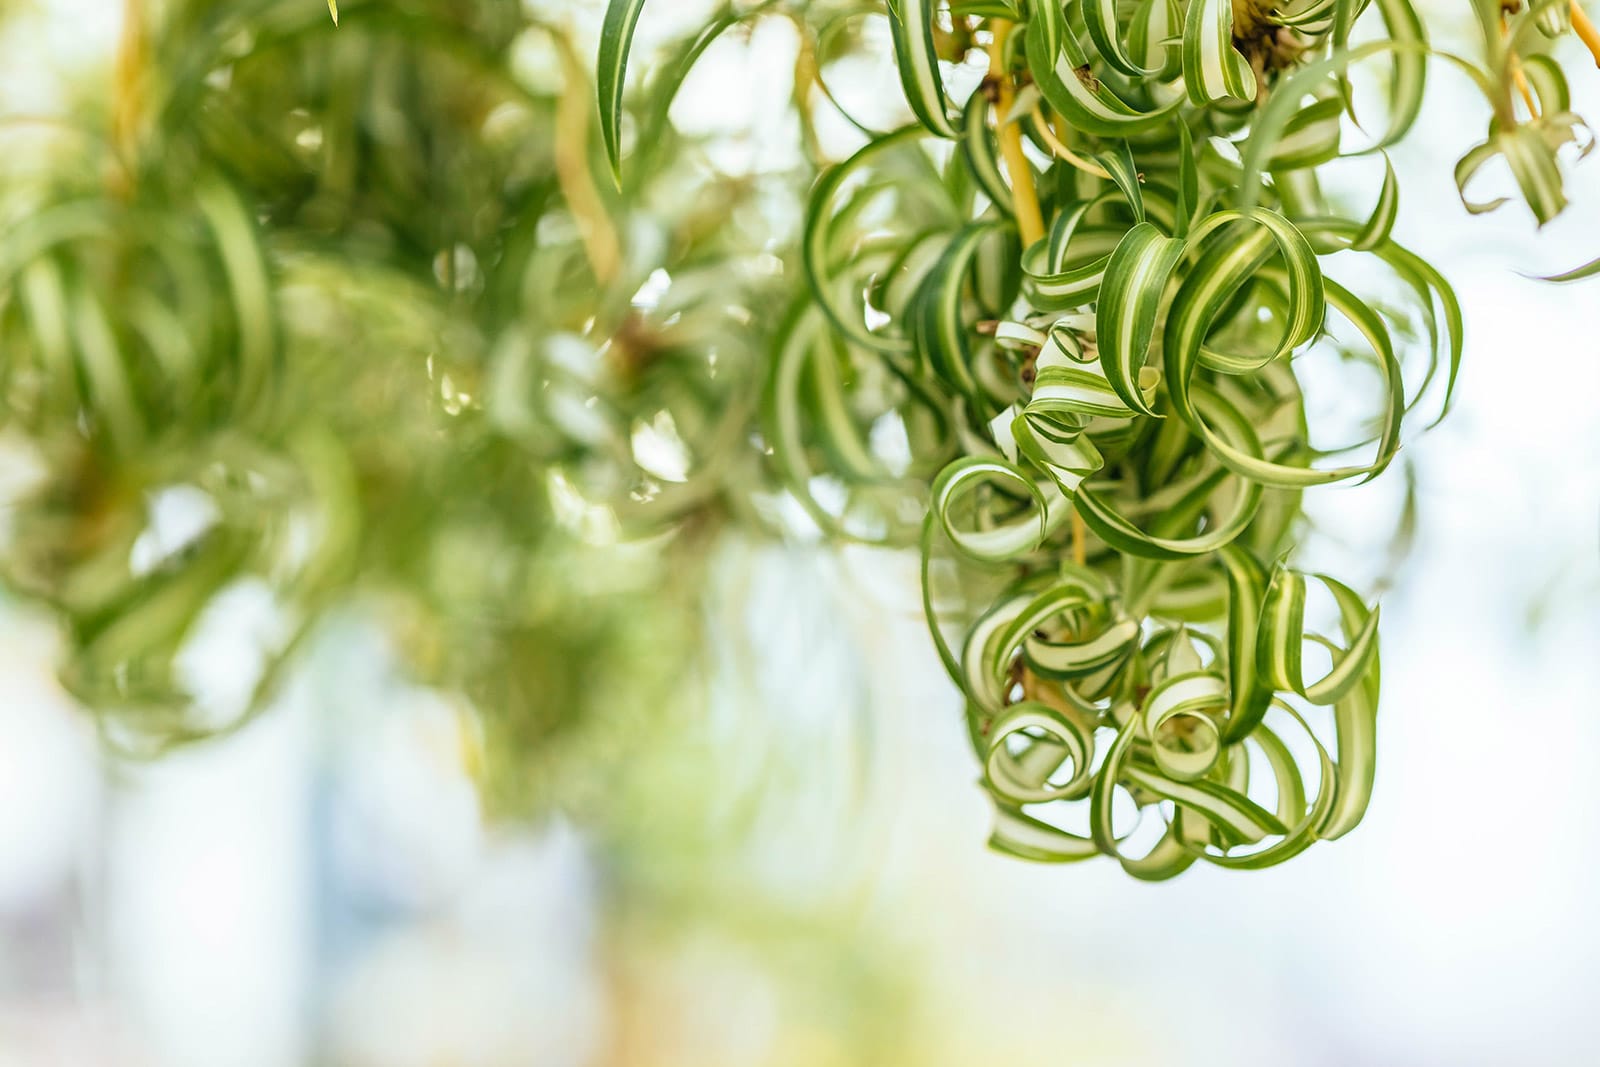 Close-up of curly pups (plantlets or spiderettes) dangling off a spider plant